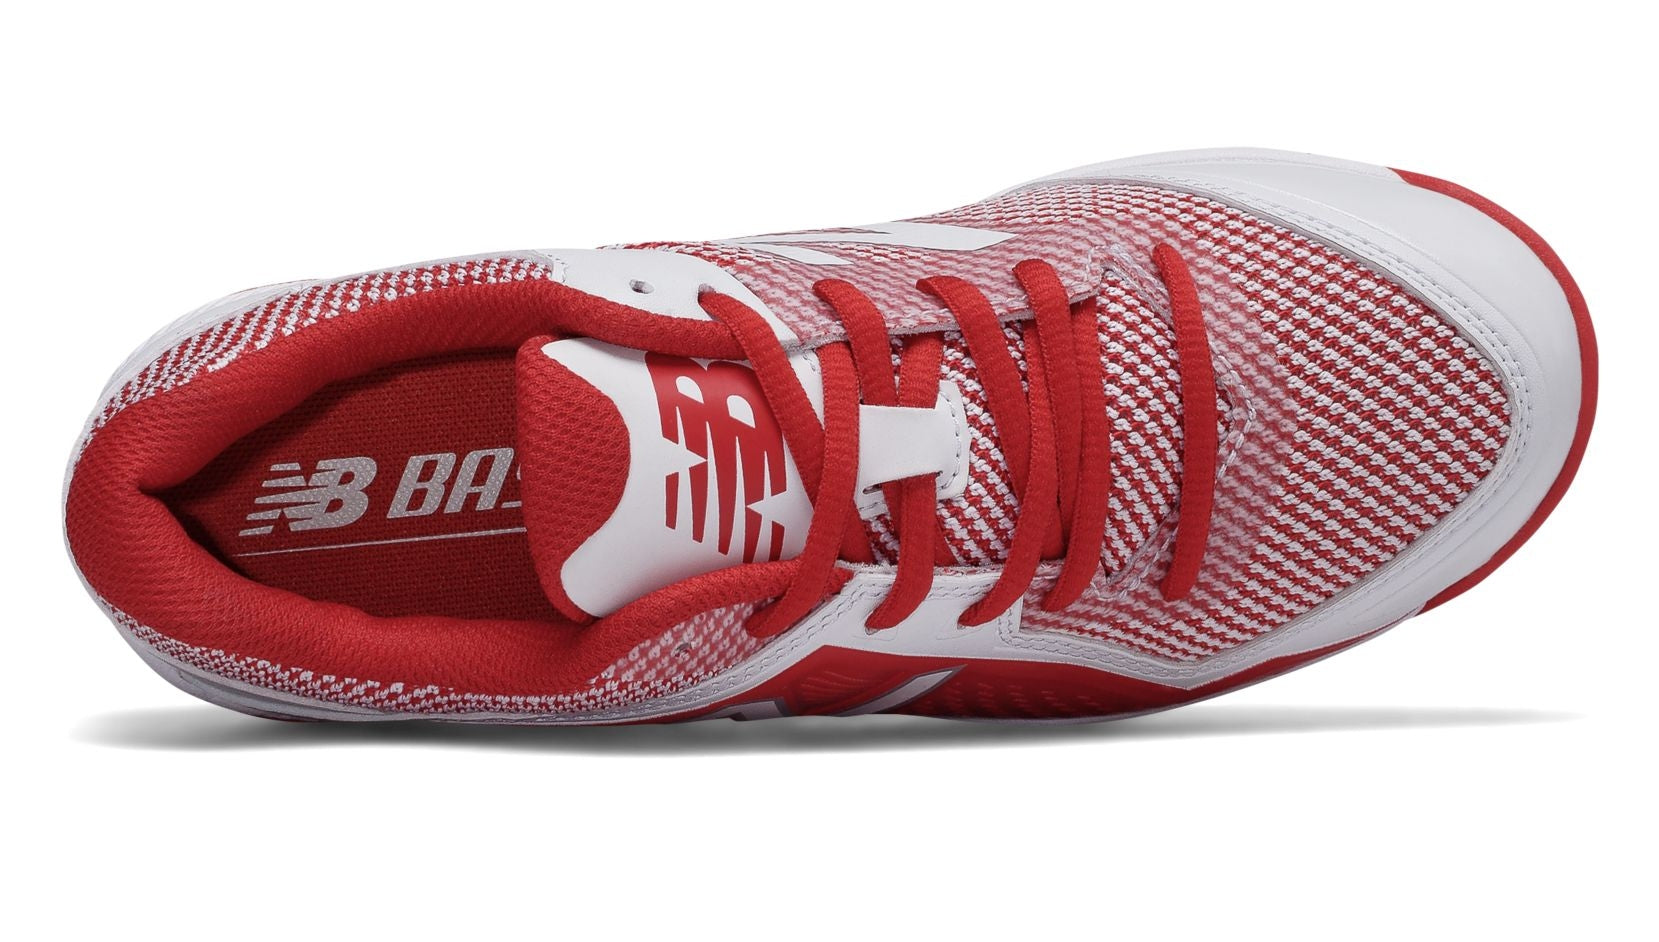 New Balance - Red/White Junior Low Rubber Baseball Cleats (J4040TR4)